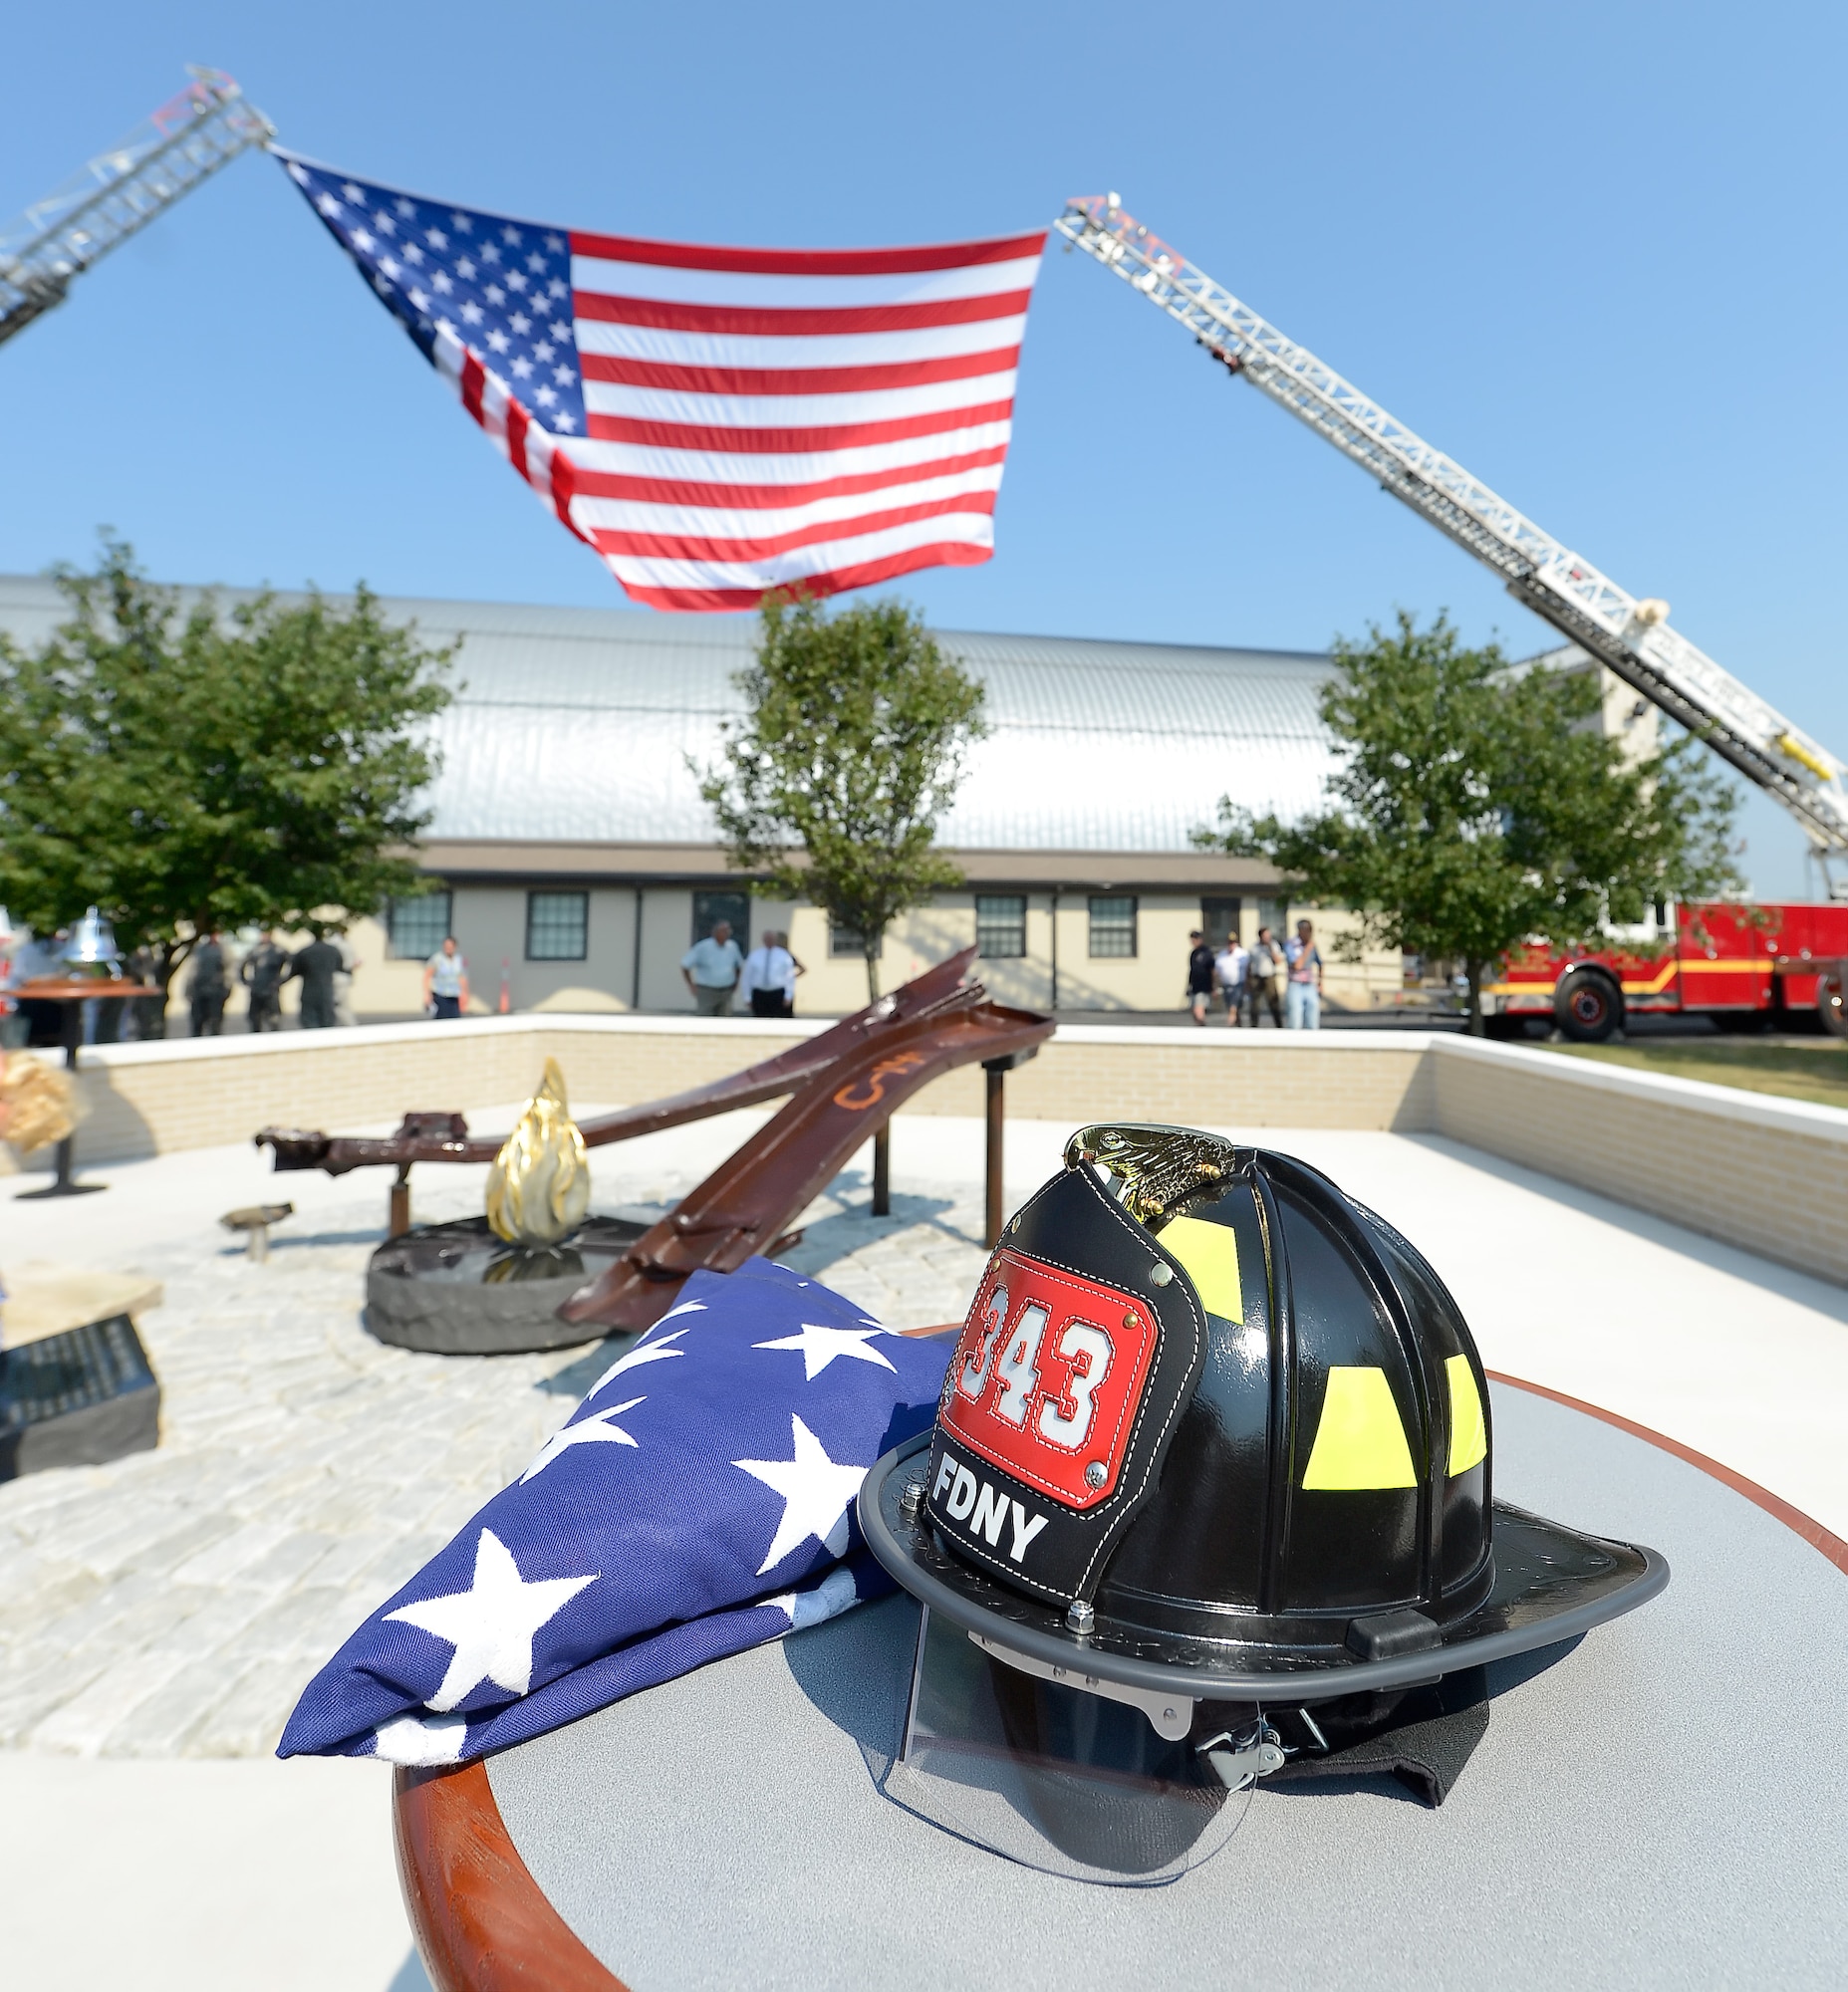 A new a memorial to those killed on Sept. 11, 2001 was dedicated Sept. 11, 2013, at Dover Air Force Base, Del. The memorial, which incorporates two pieces of steel from World Trade Center tower one, a rock from the United Airlines Flight 93 crash site and a block from the damaged portion of the Pentagon, makes Delaware the 50th and final state to have a public memorial. The steel was acquired through the Port Authority of New York and New Jersey World Trade Center steel program.